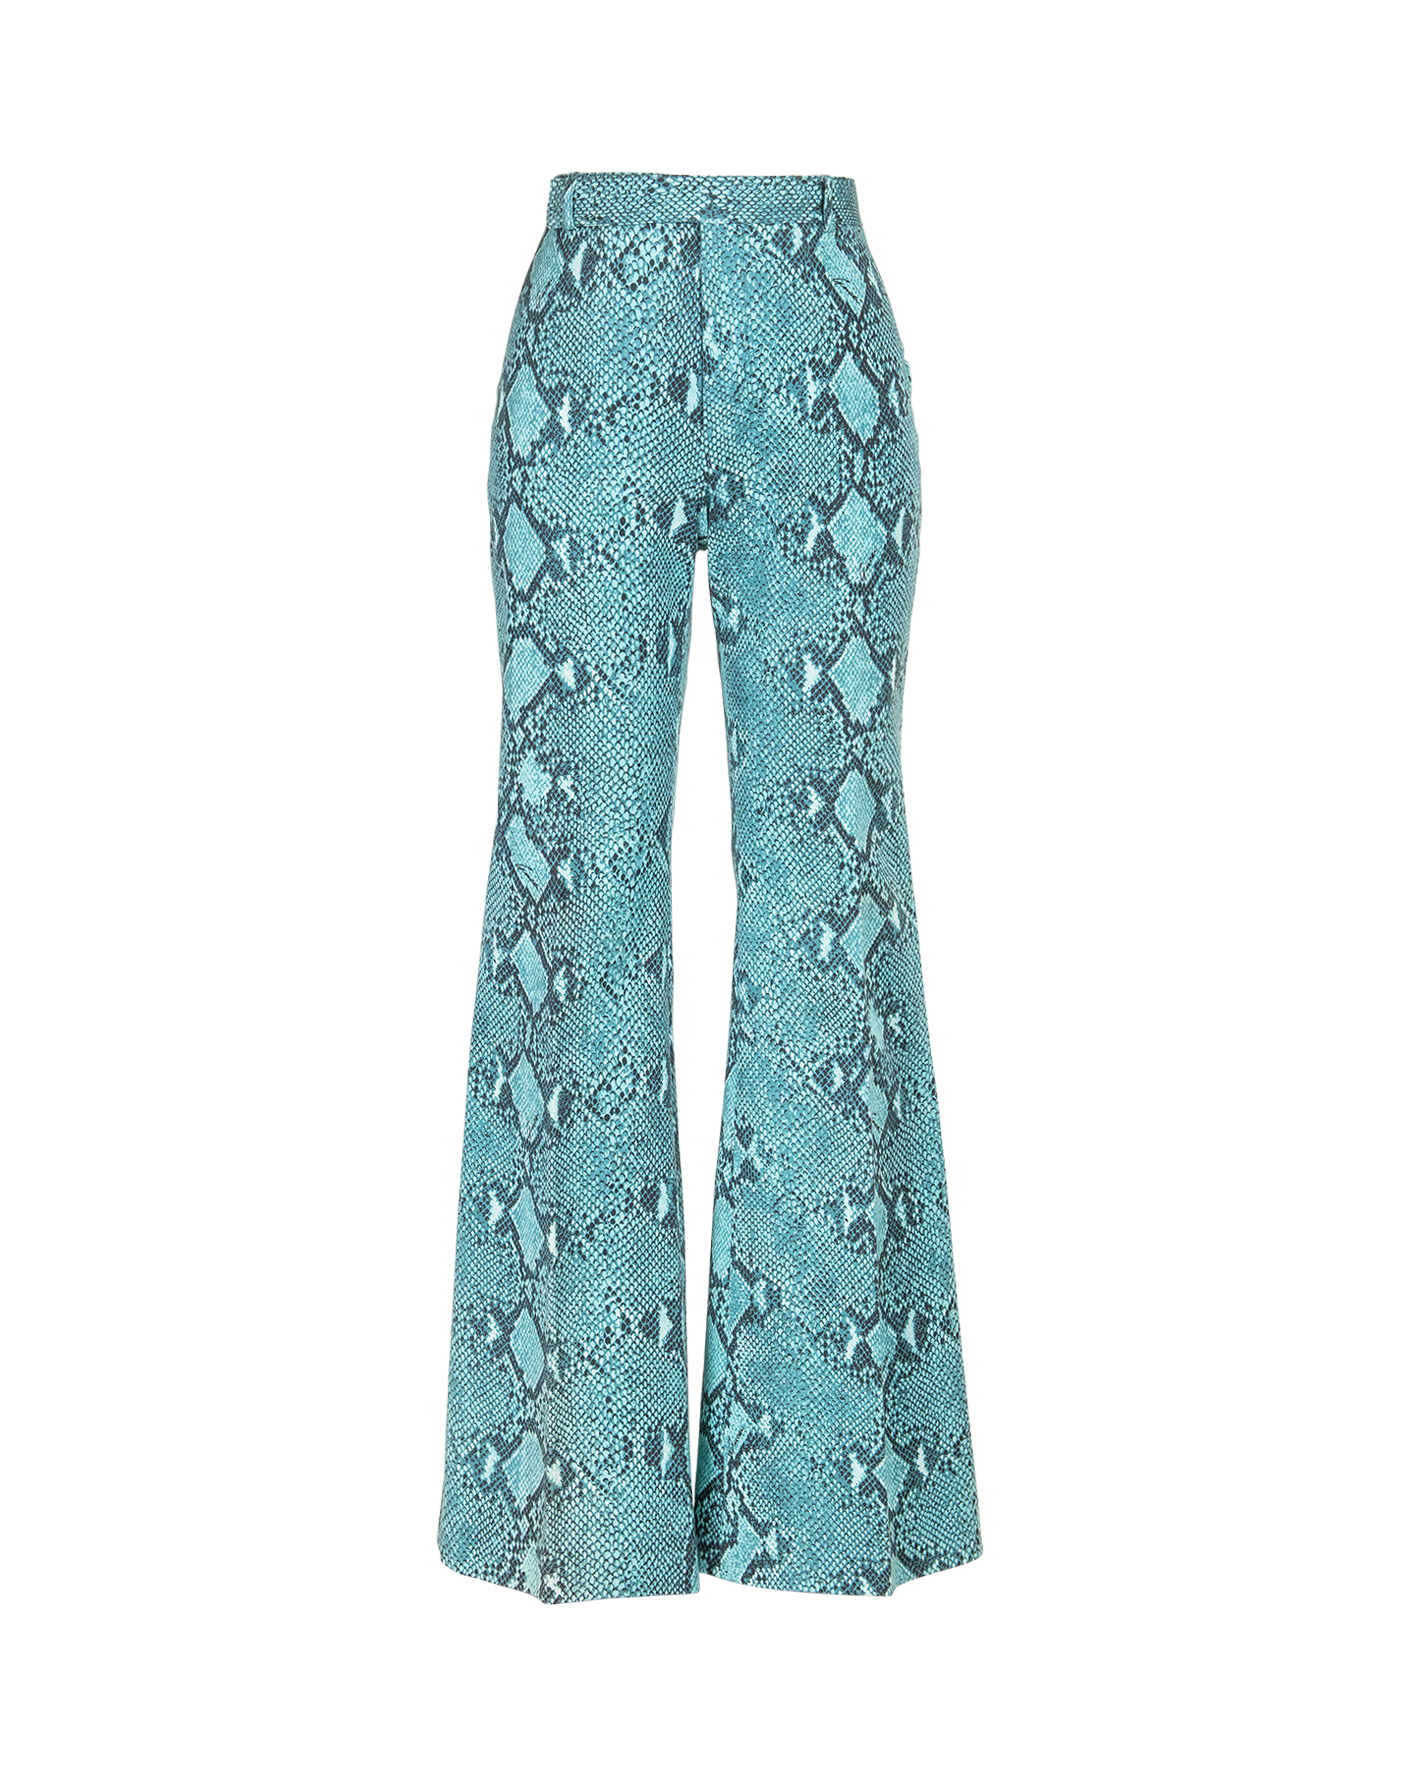 S/S 2000 Turquoise Snakeskin Trousers